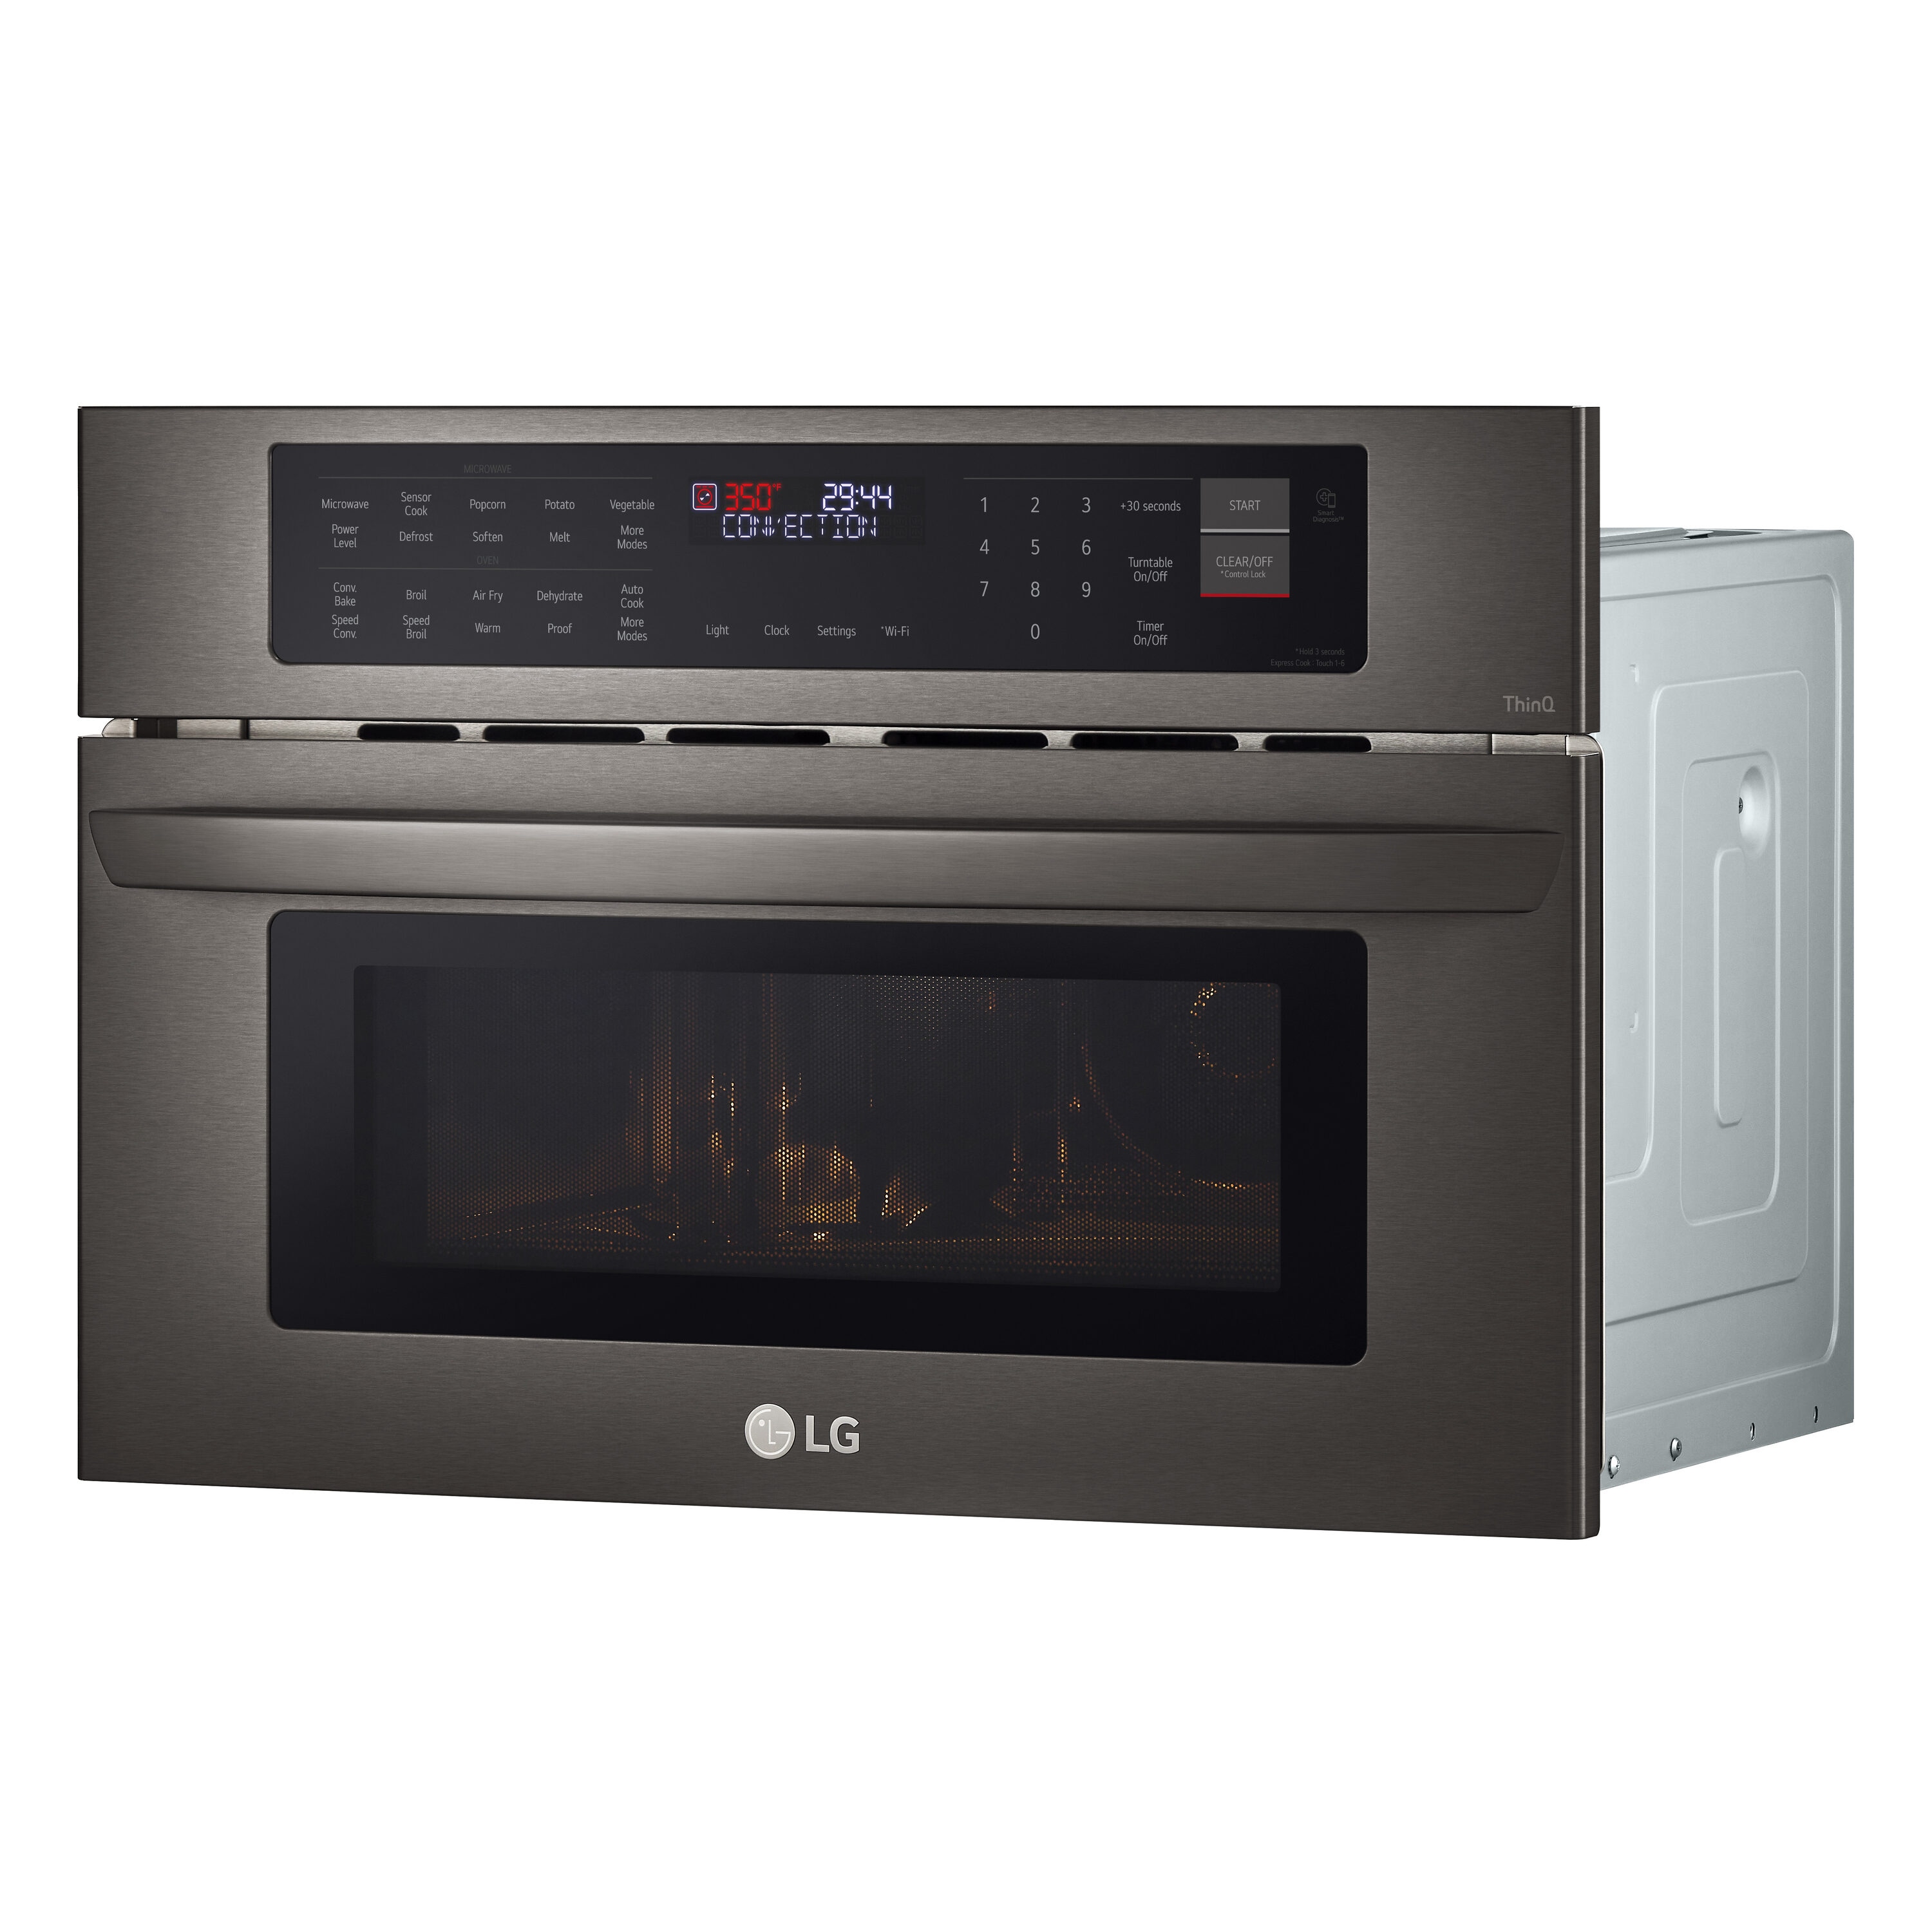 LG 1.7/4.7 Cu. ft. Smart Combination Wall Oven with Convection and Air Fry Black Stainless Steel